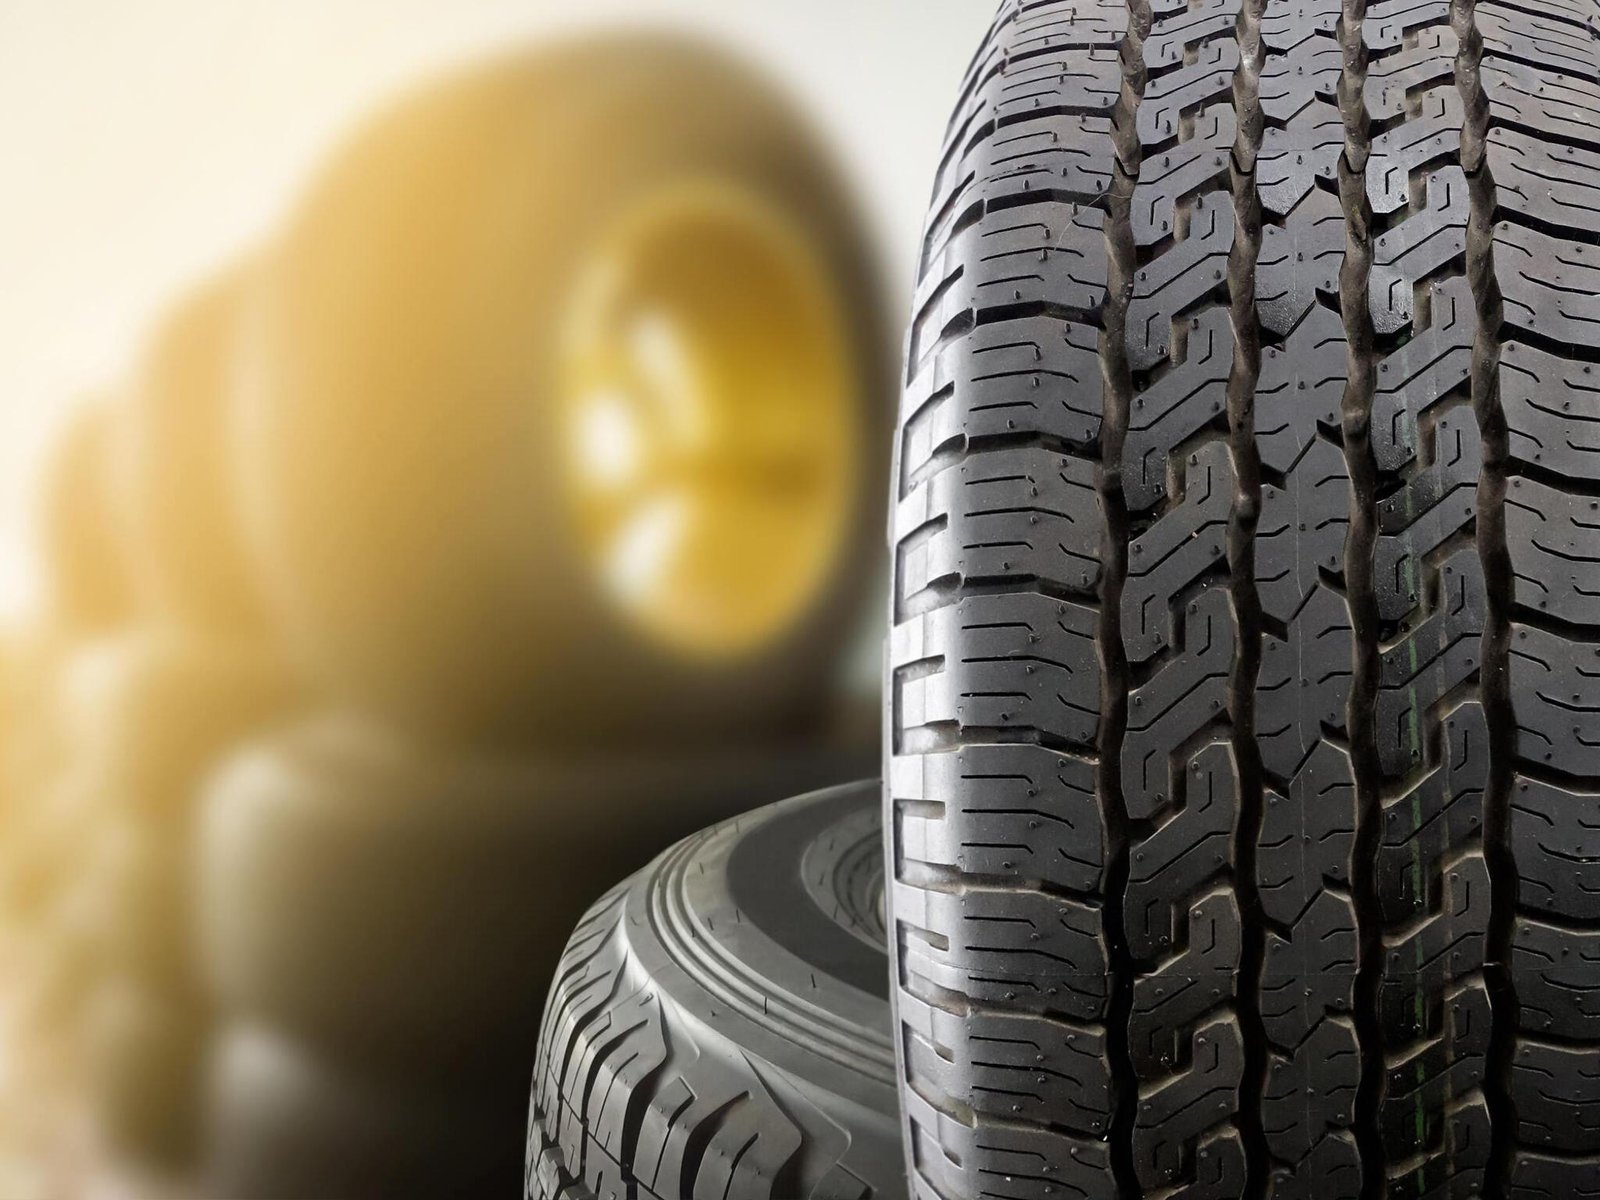 Causes of Increasing Tire Prices